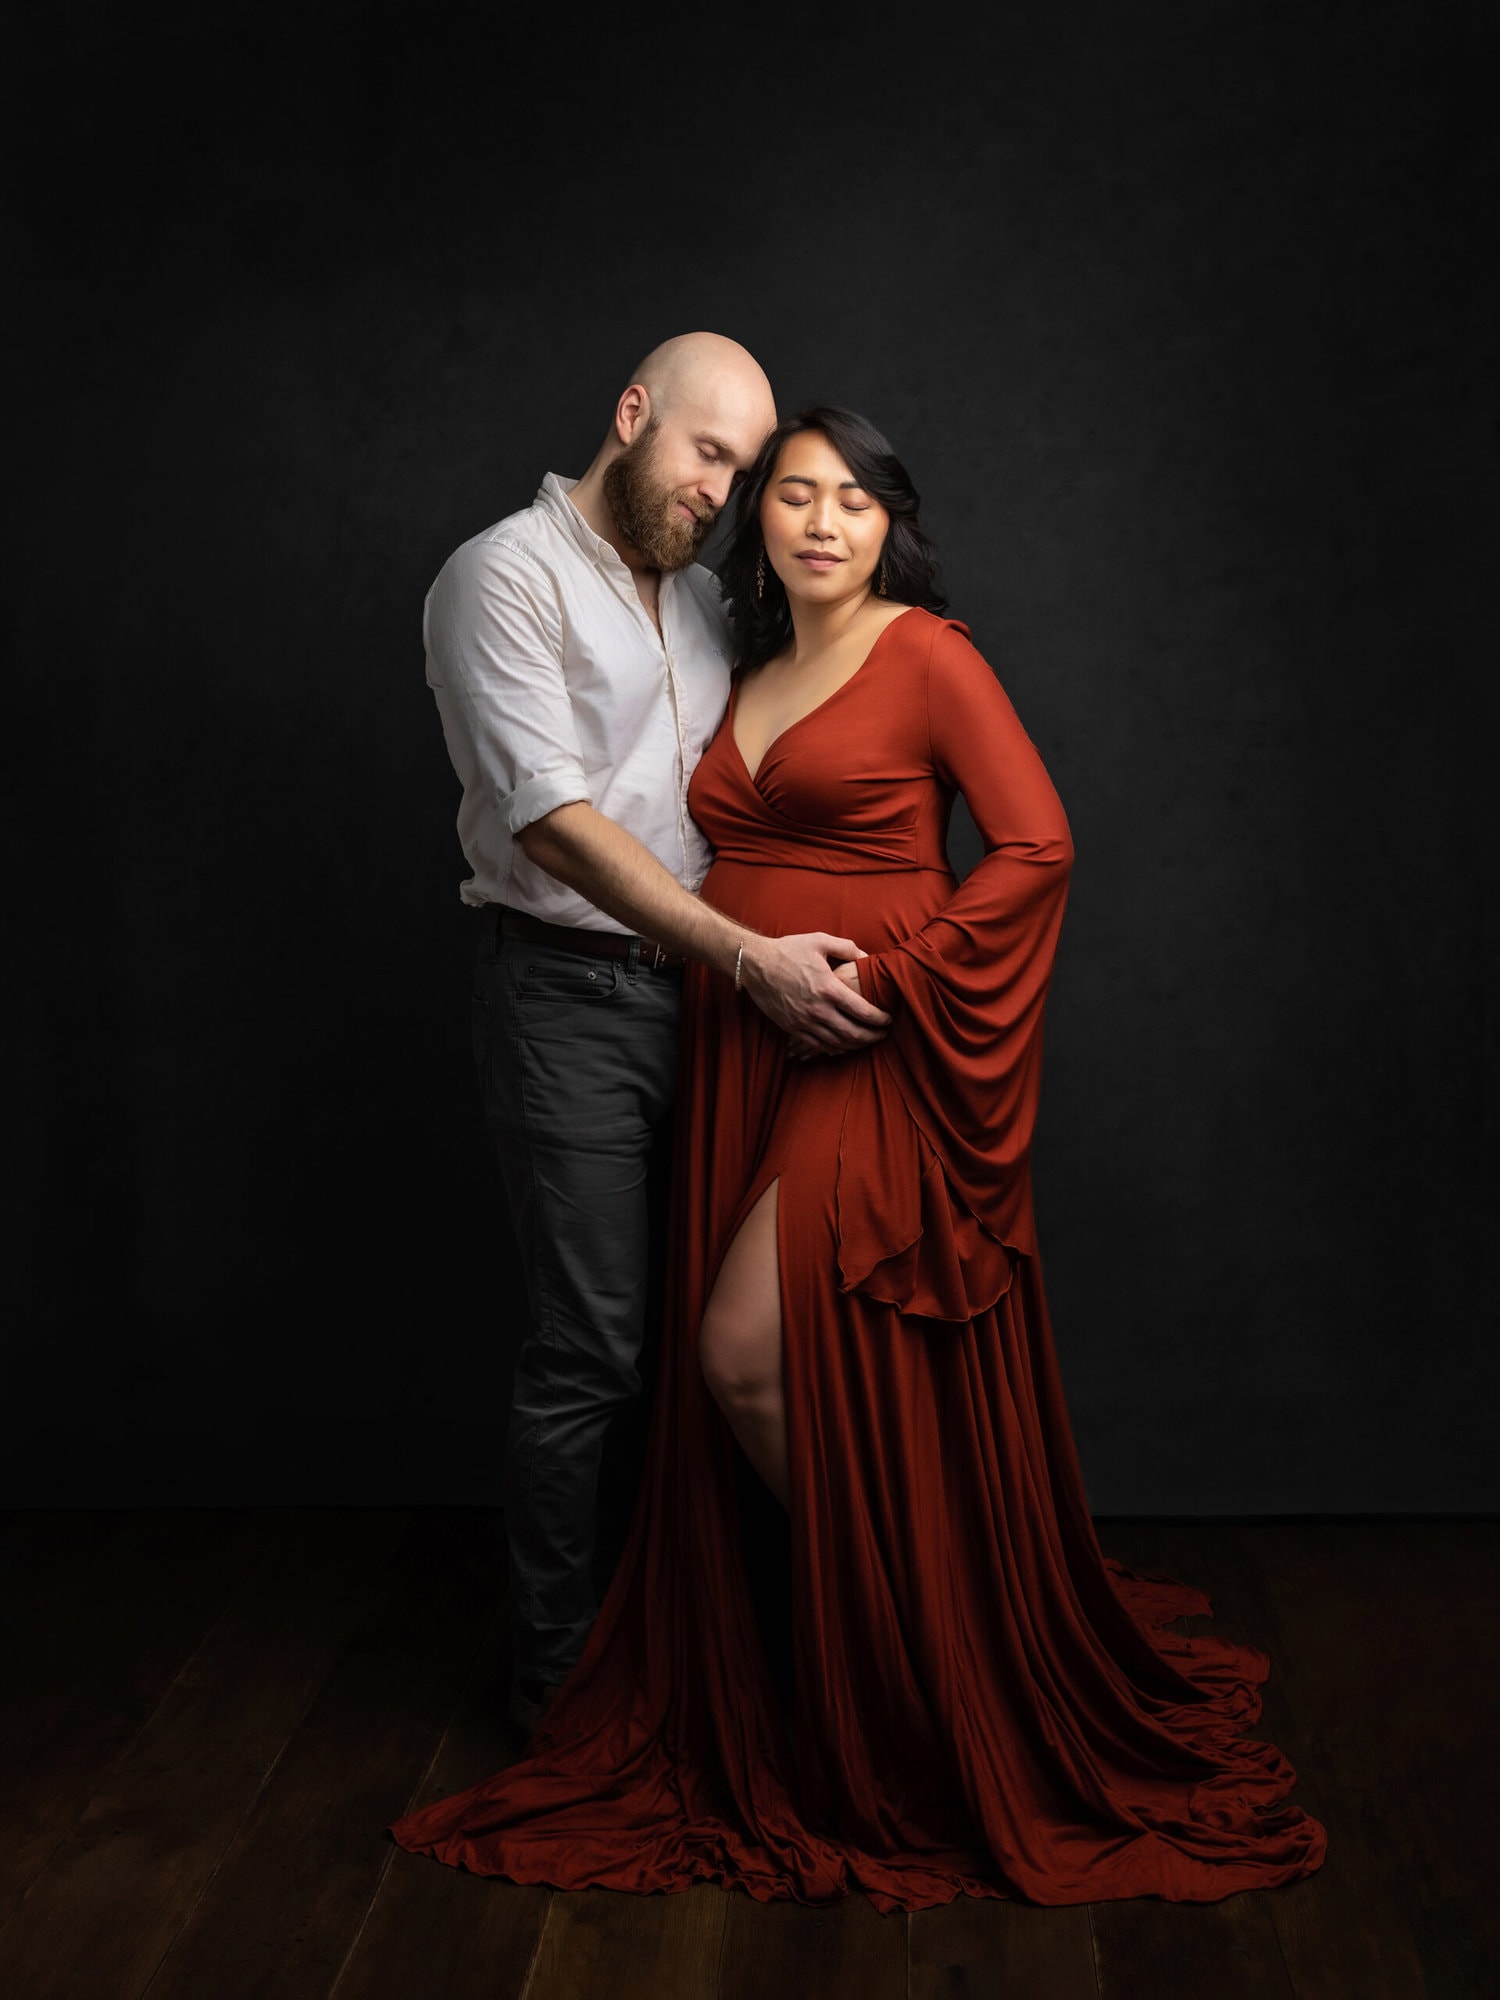 Pregnant lady in a rust coloured dress embraces her husband as they touch her bump during Maternity Shoot in Suffolk studio